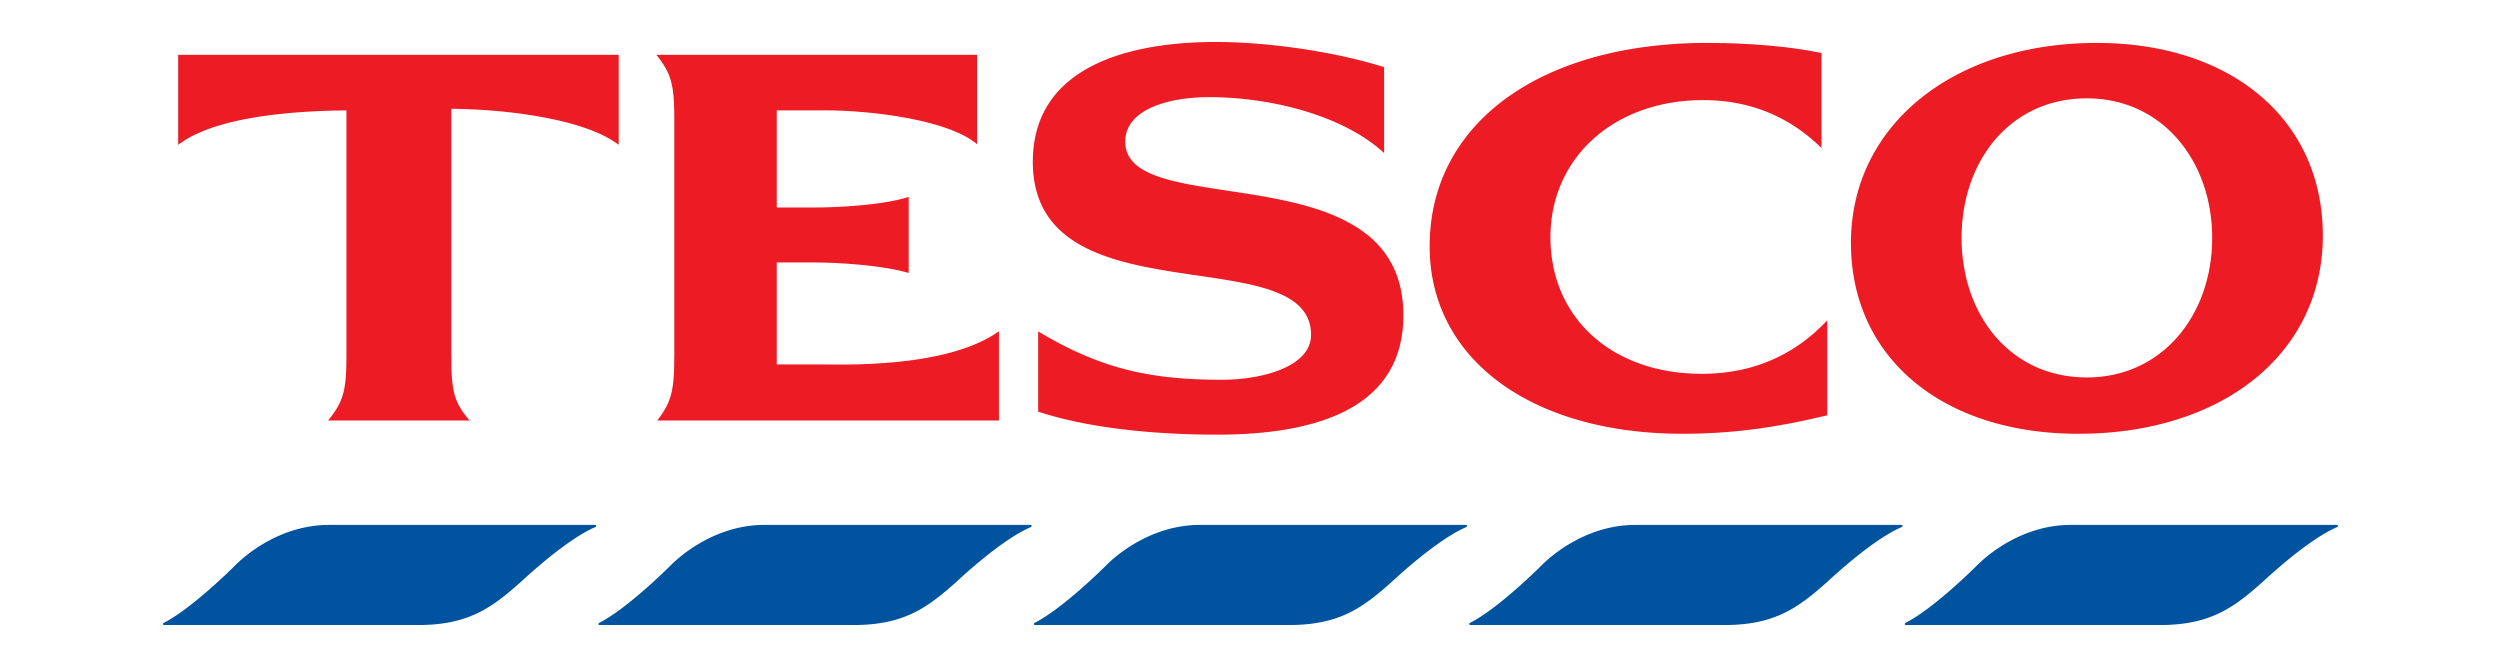 Logo Text Tesco Area Marketing Free Download PNG HD PNG Image